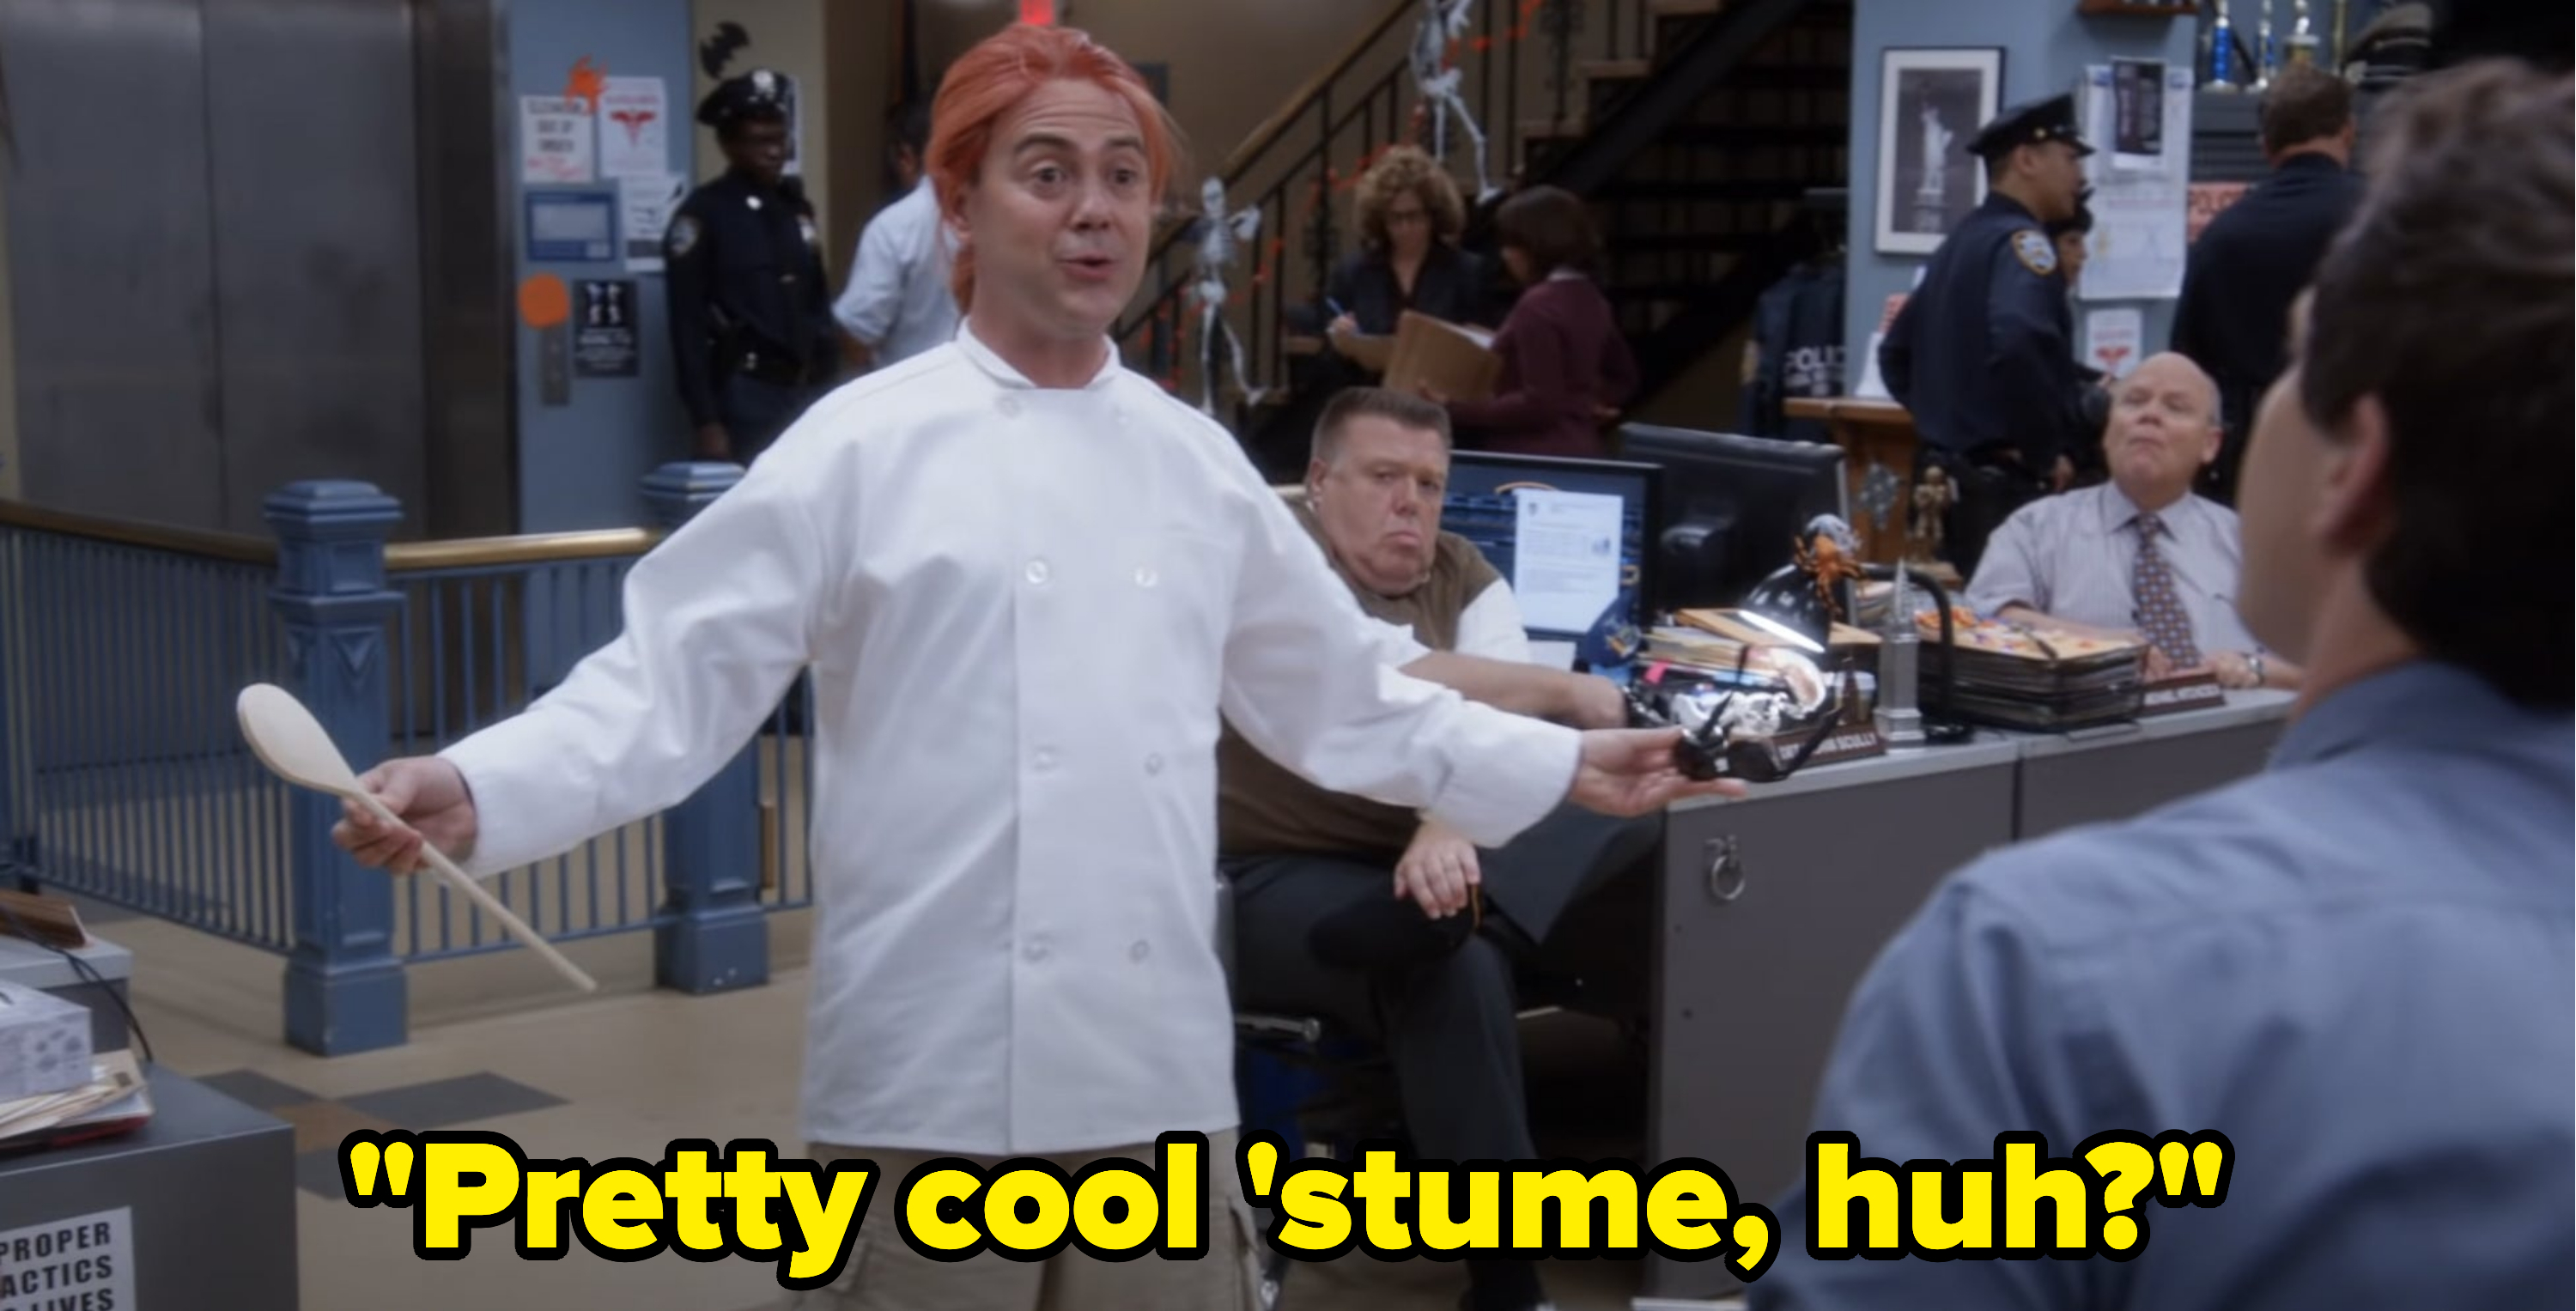 Boyle dressed as a ginger chef